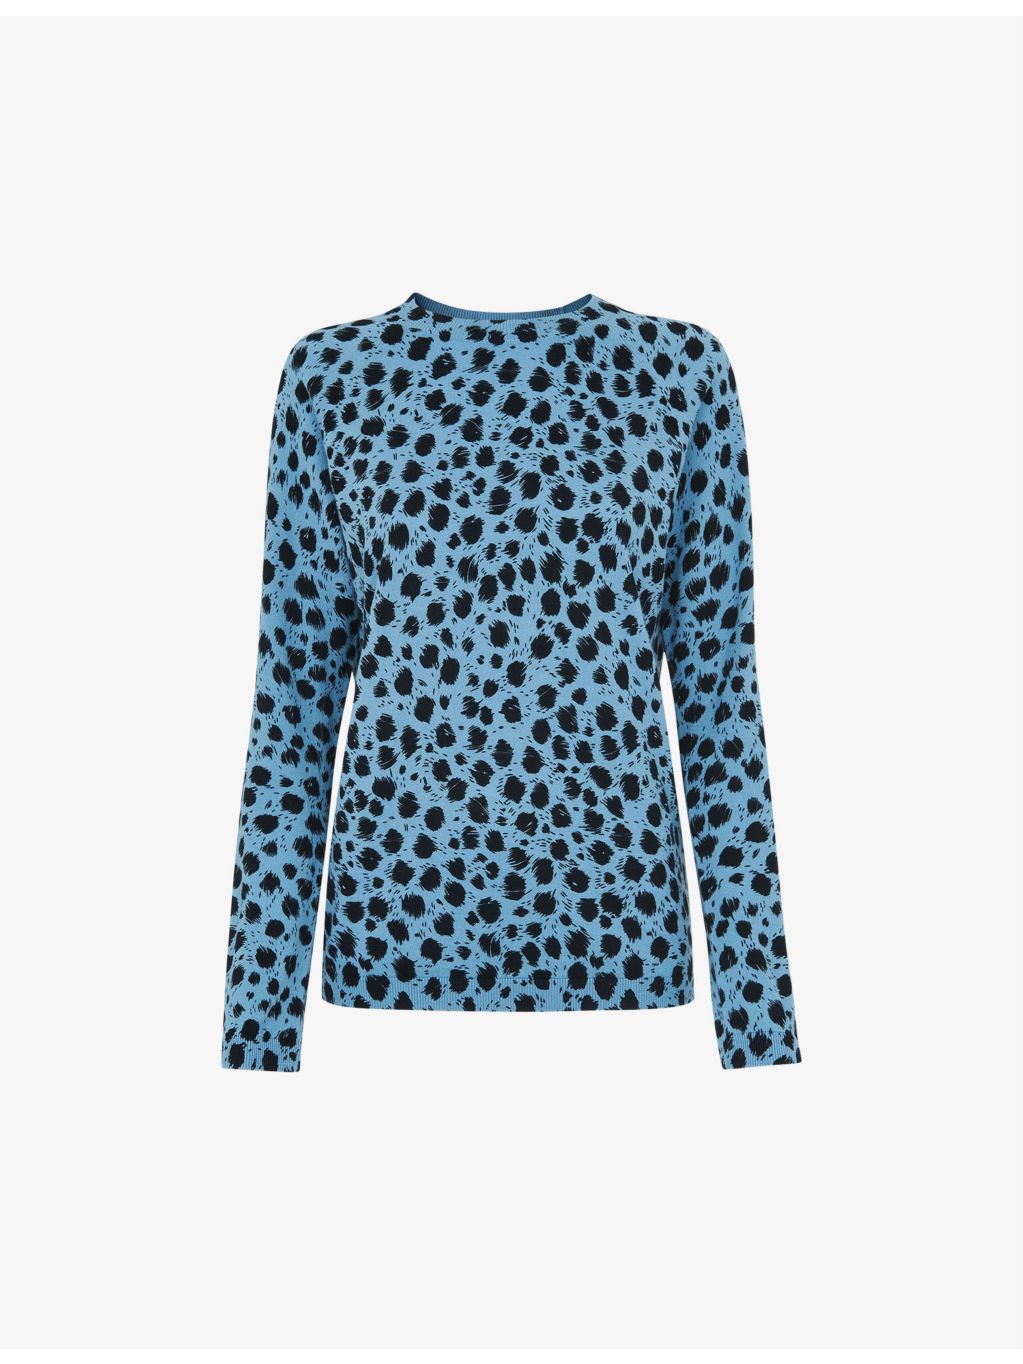 WHISTLES - Dalmatian spotted cotton-knit jumper